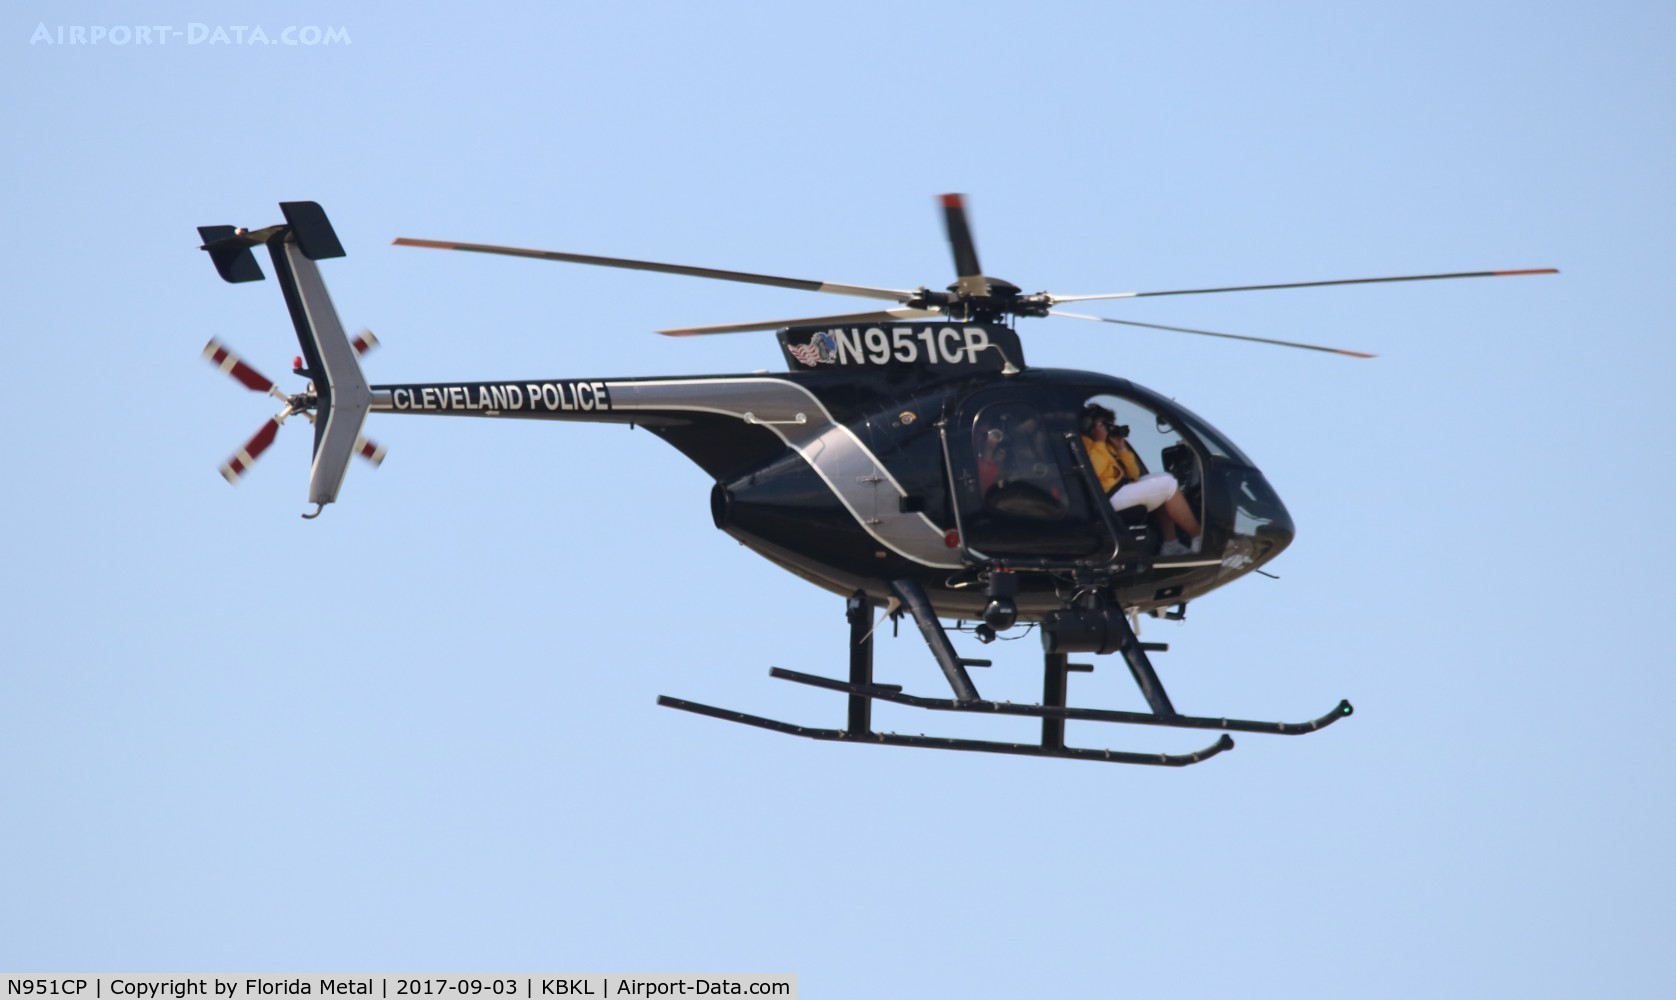 N951CP, 2000 MD Helicopters 369E C/N 0549E, Cleveland Airshow 2017